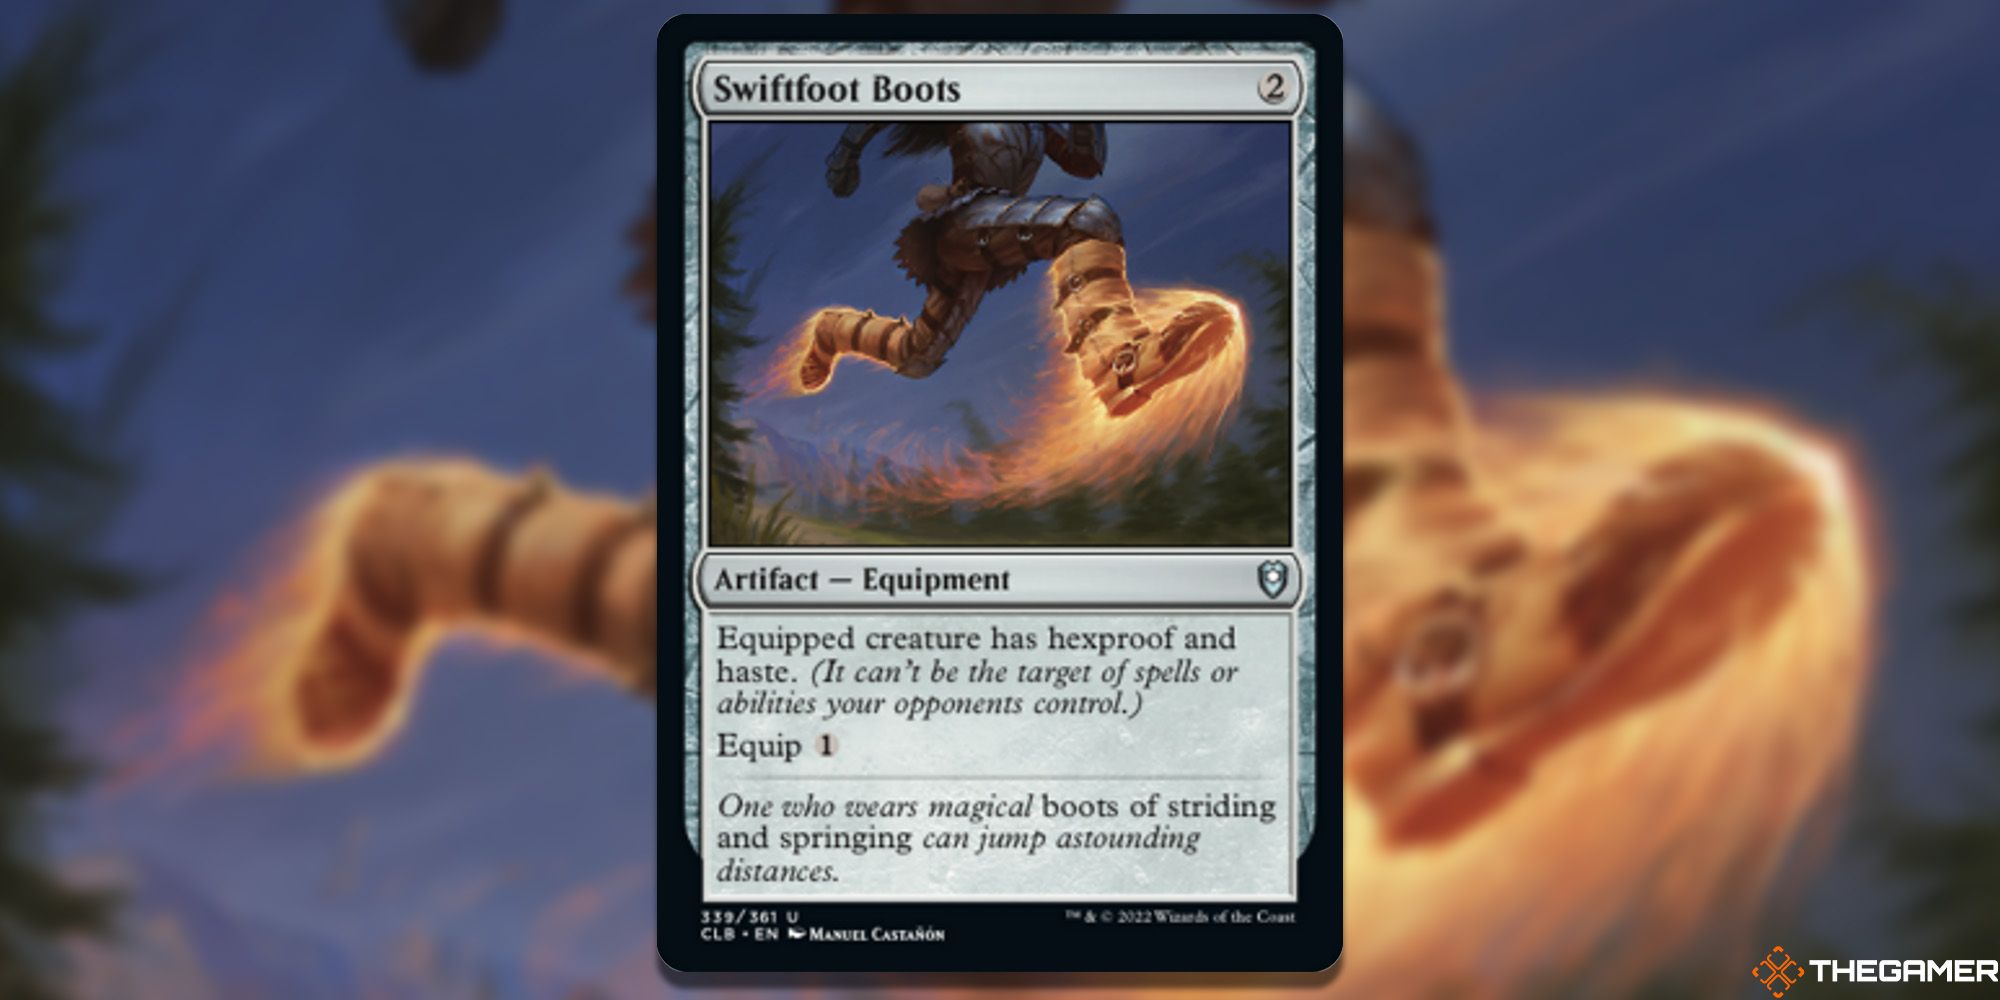 Image of the Swiftfoot Boots card in Magic: The Gathering, with art by Manuel Castañón